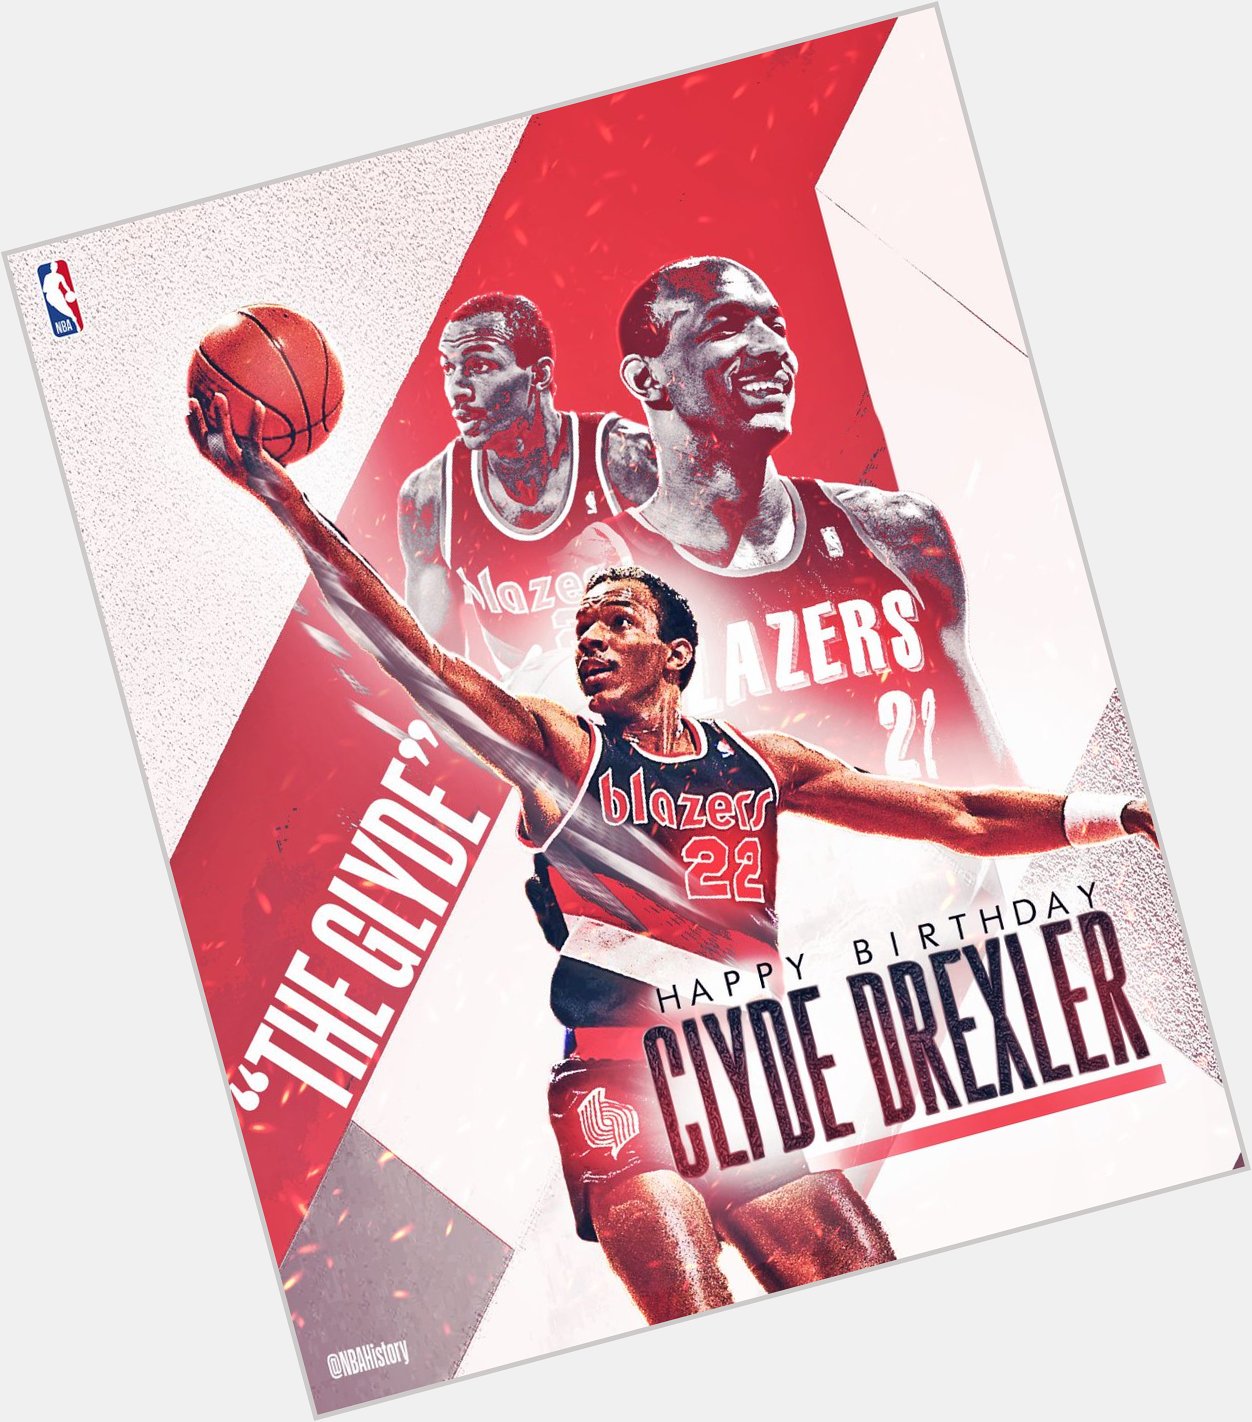 Happy 56th Birthday to 10x All-Star and Hall of Famer, Clyde Drexler! 